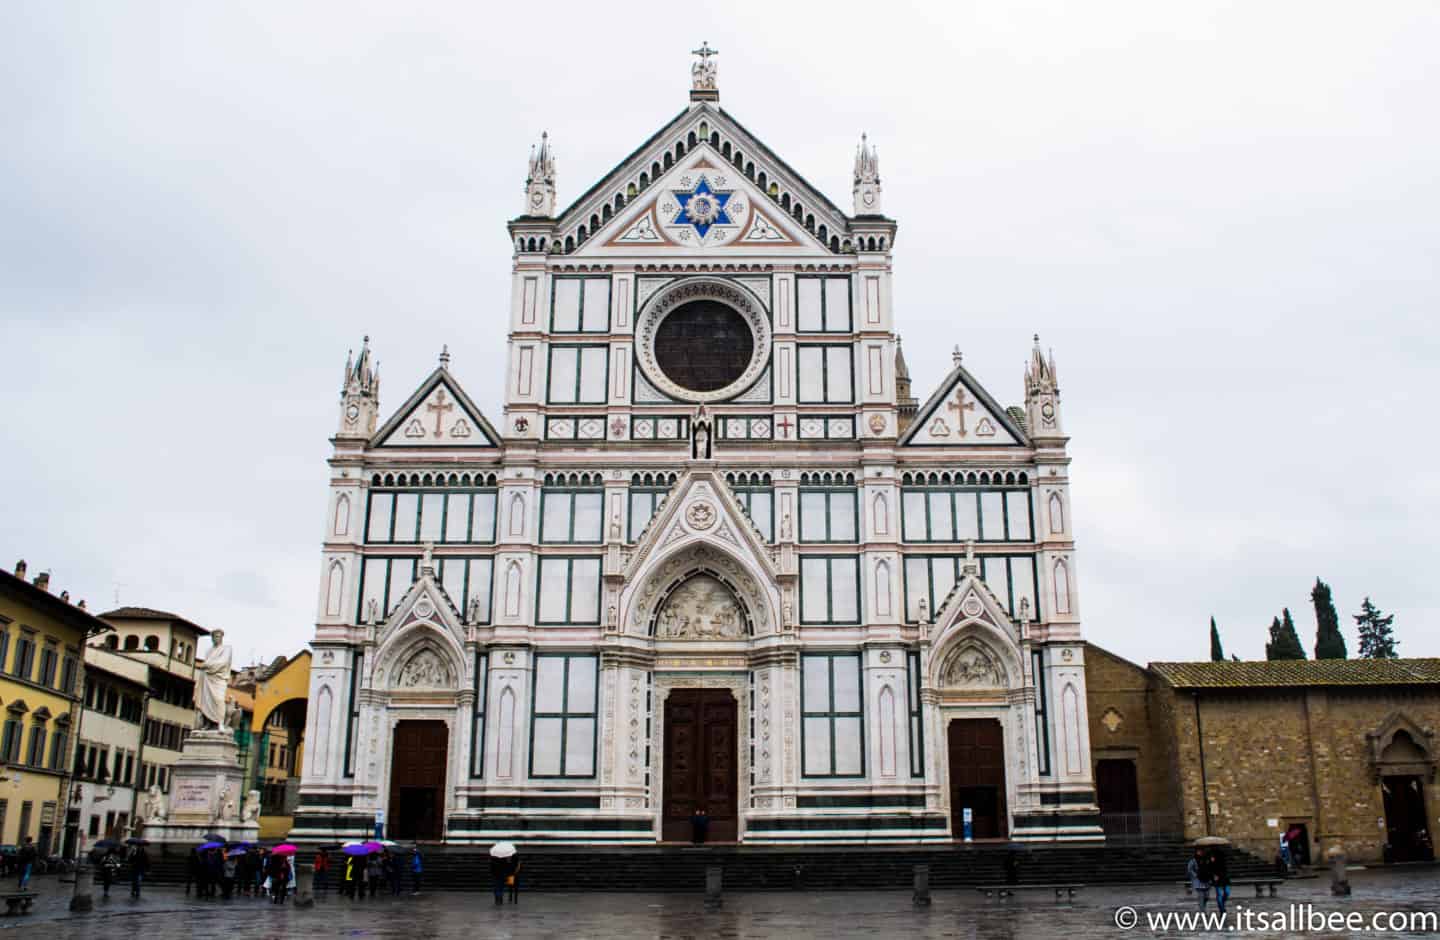 Florence Winter Guide - Things To Do In Florence In Winter. Places to visit in Florence Italy during winter months(December, January, February). #europe #italy #traveltips #winter - winter travel destinations - florence italy food - #destinations #italian #gelato #winterfestical #pontevecchio #duomo